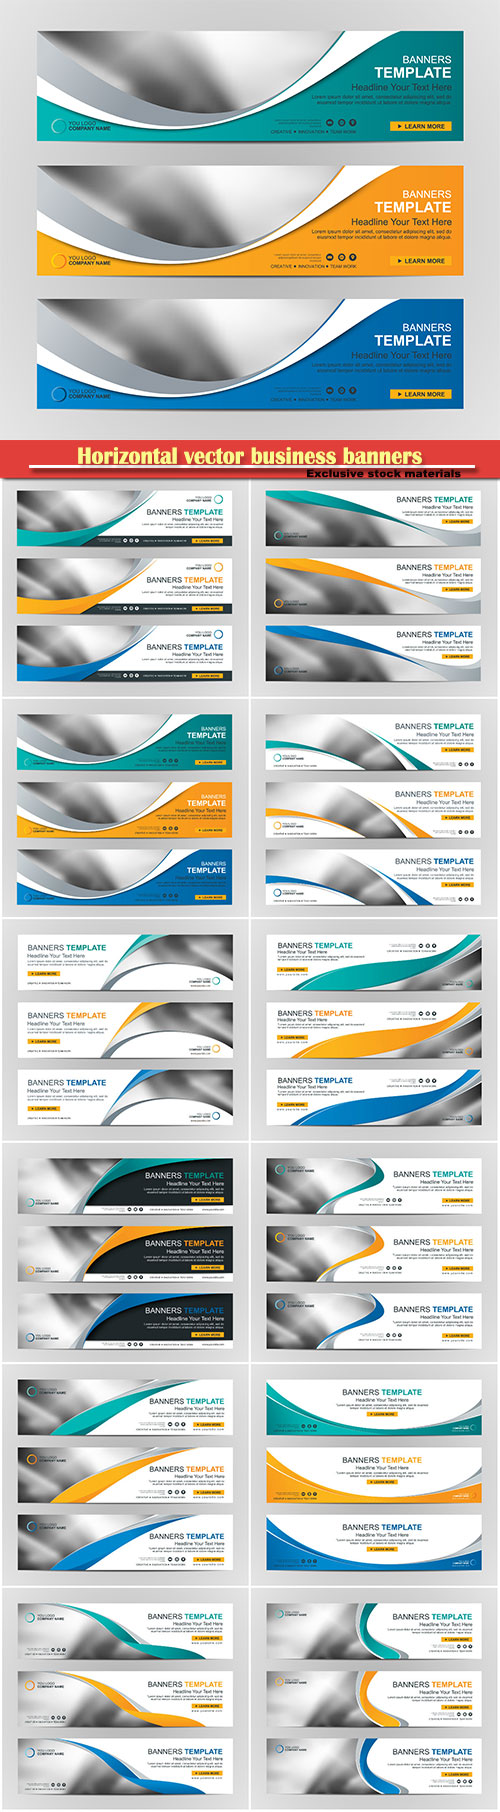 Horizontal vector business banners